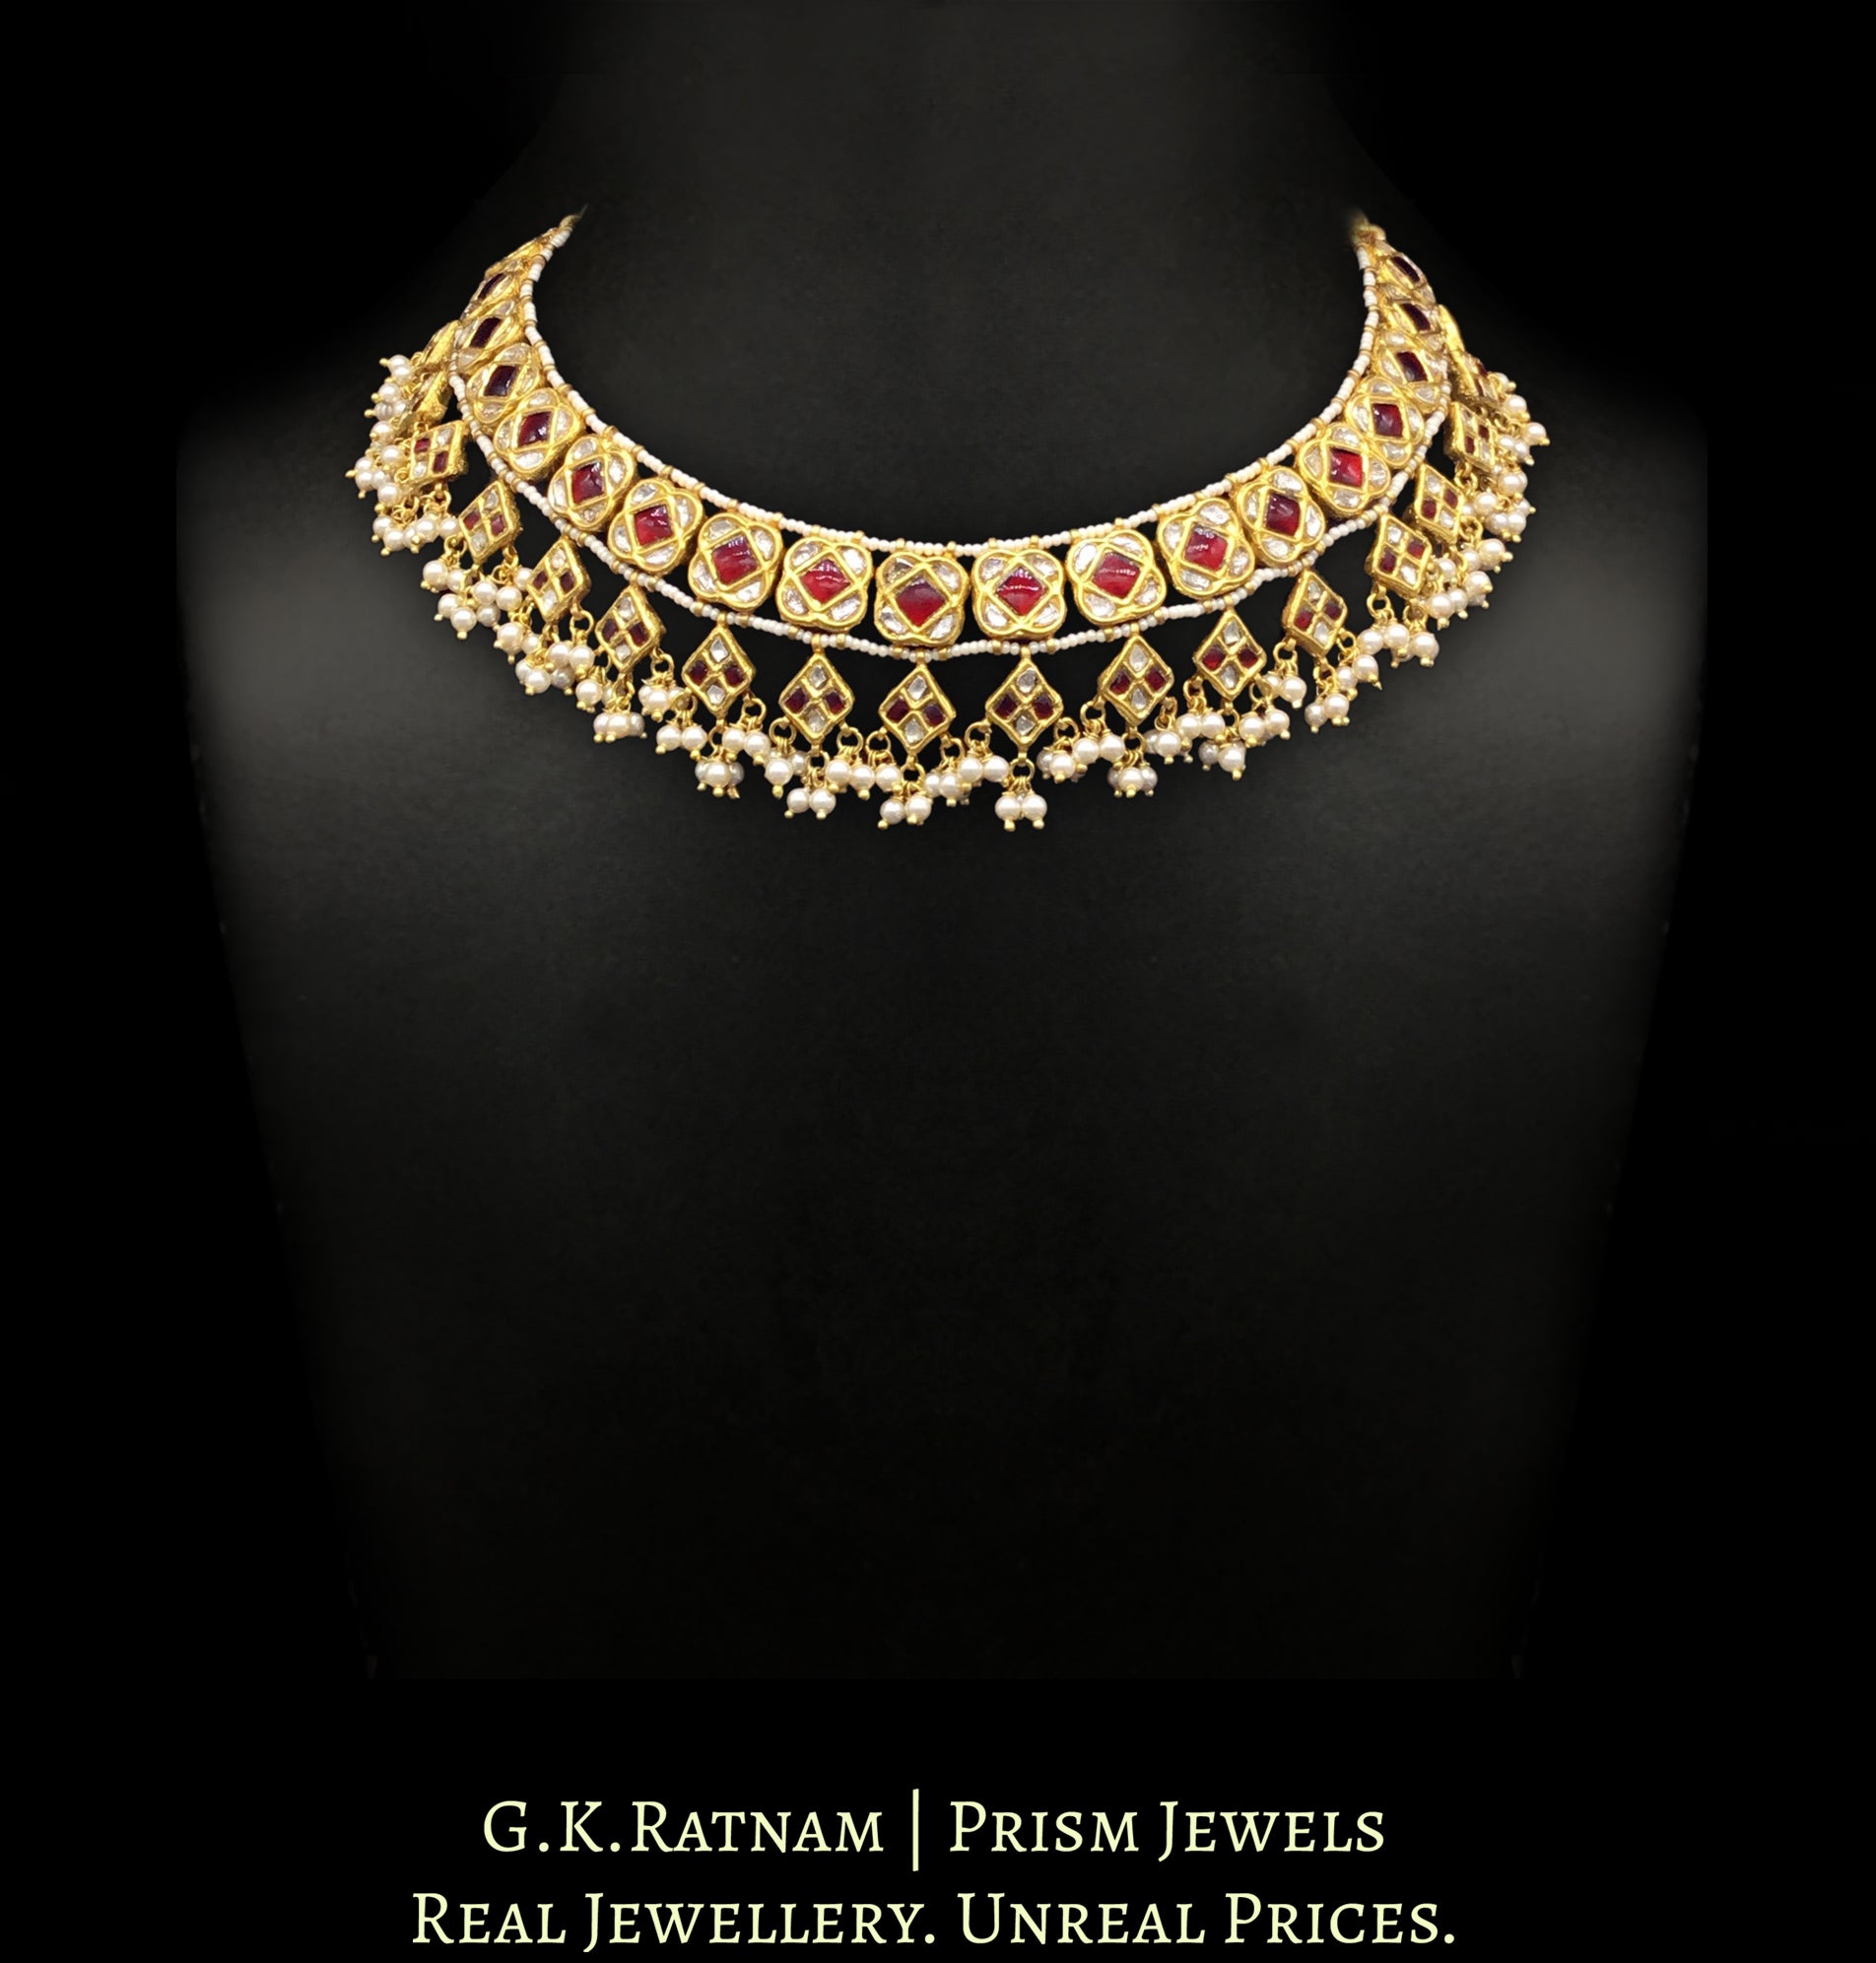 23k Gold and Diamond Polki Necklace with ruby-red stones and lustrous pearls